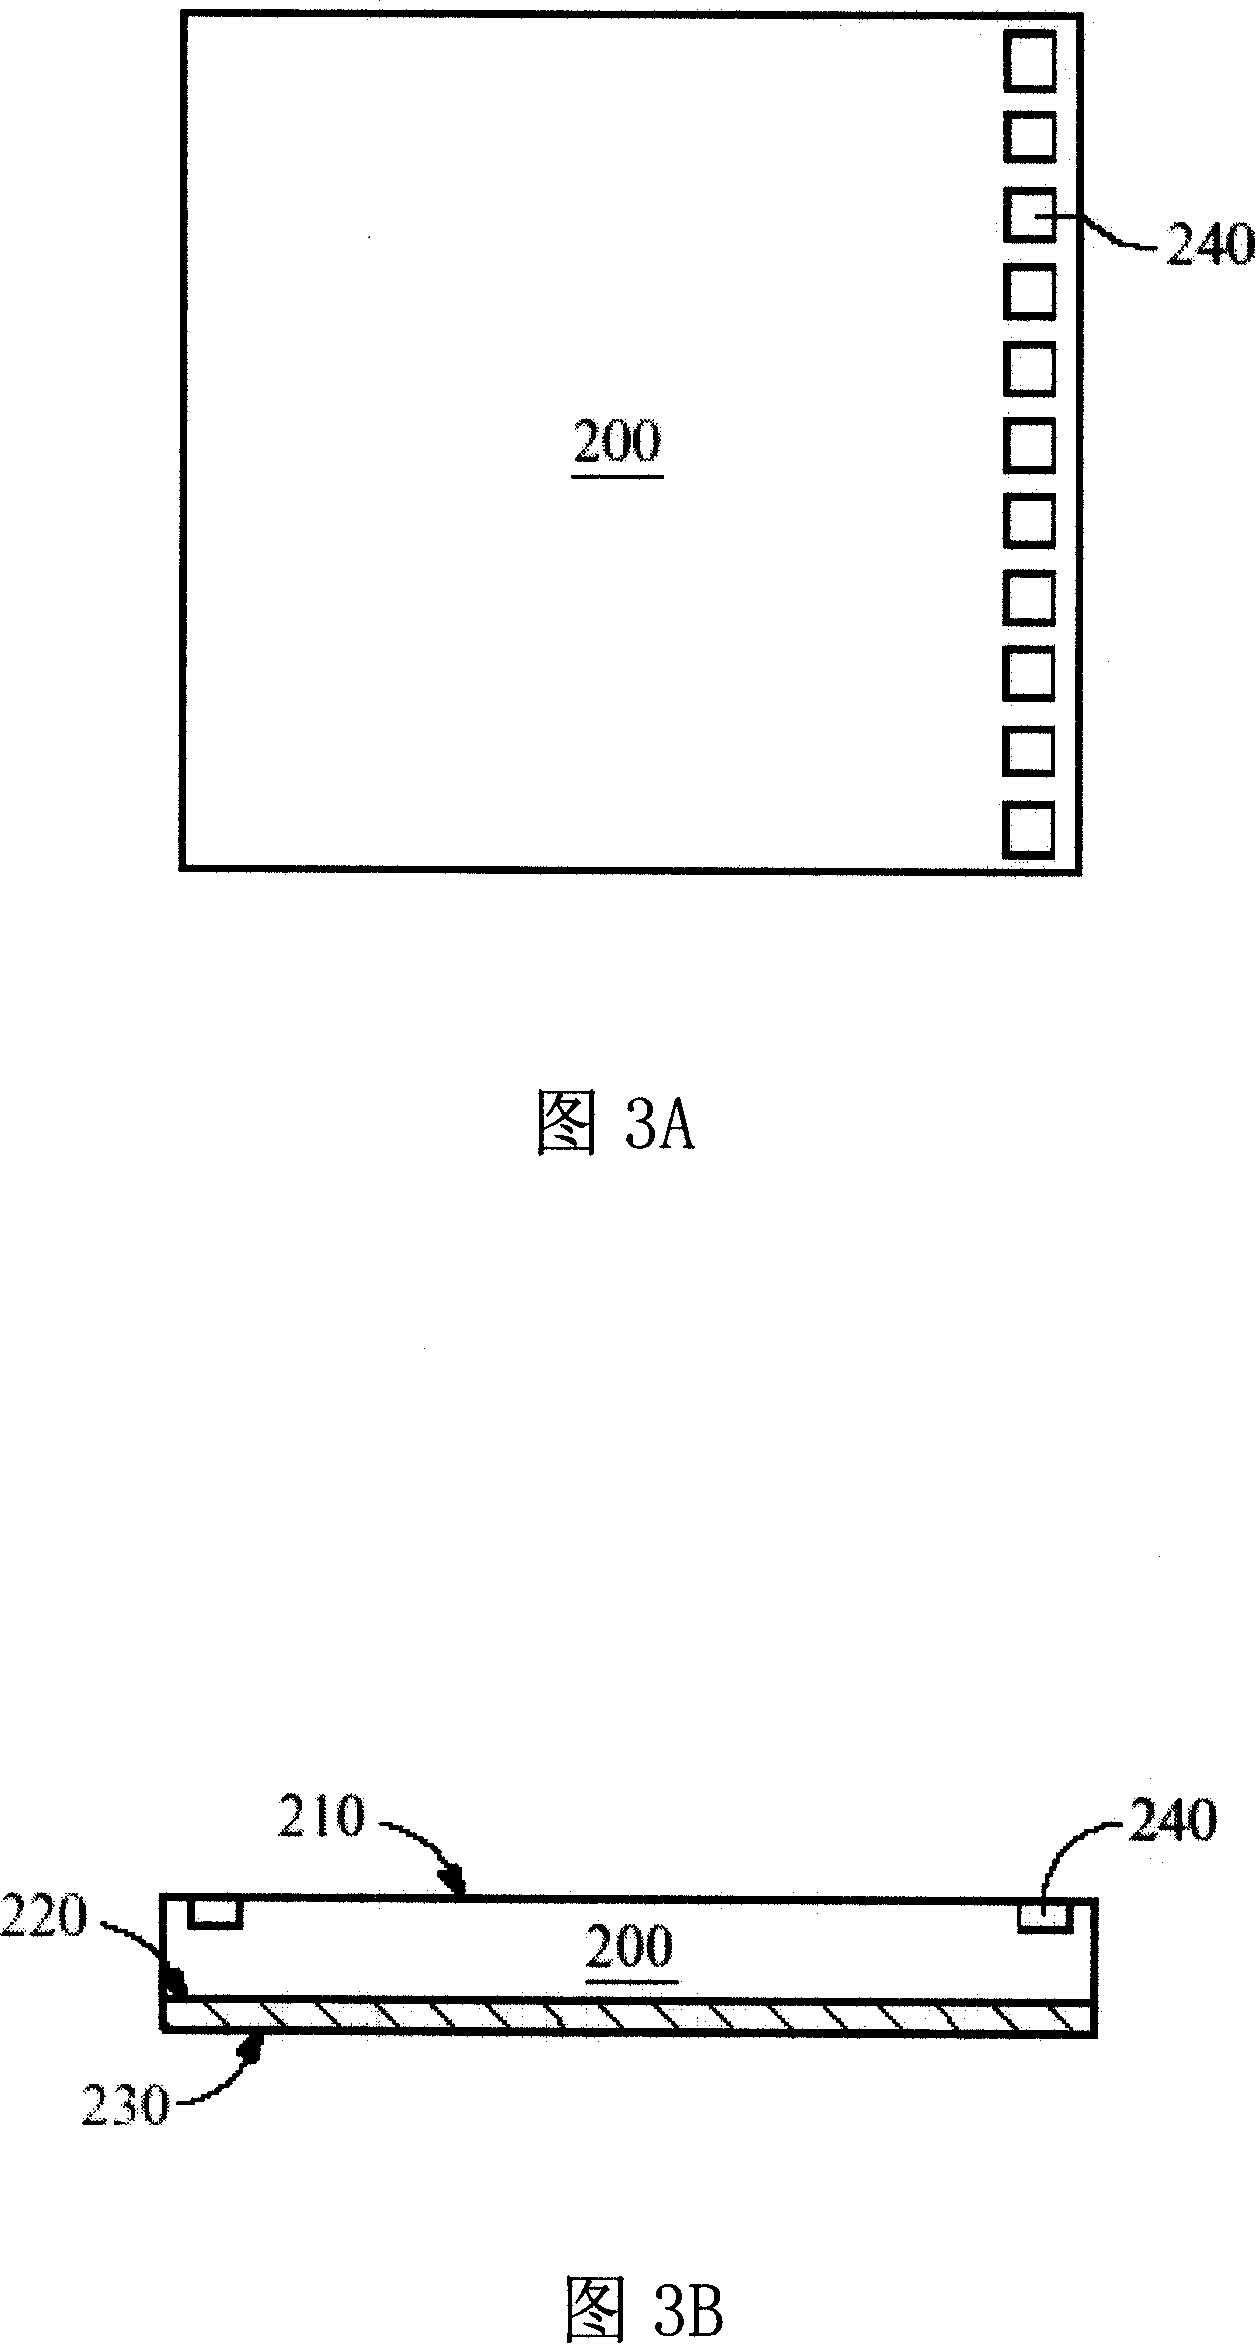 Multi-chip stacking type packaging structure